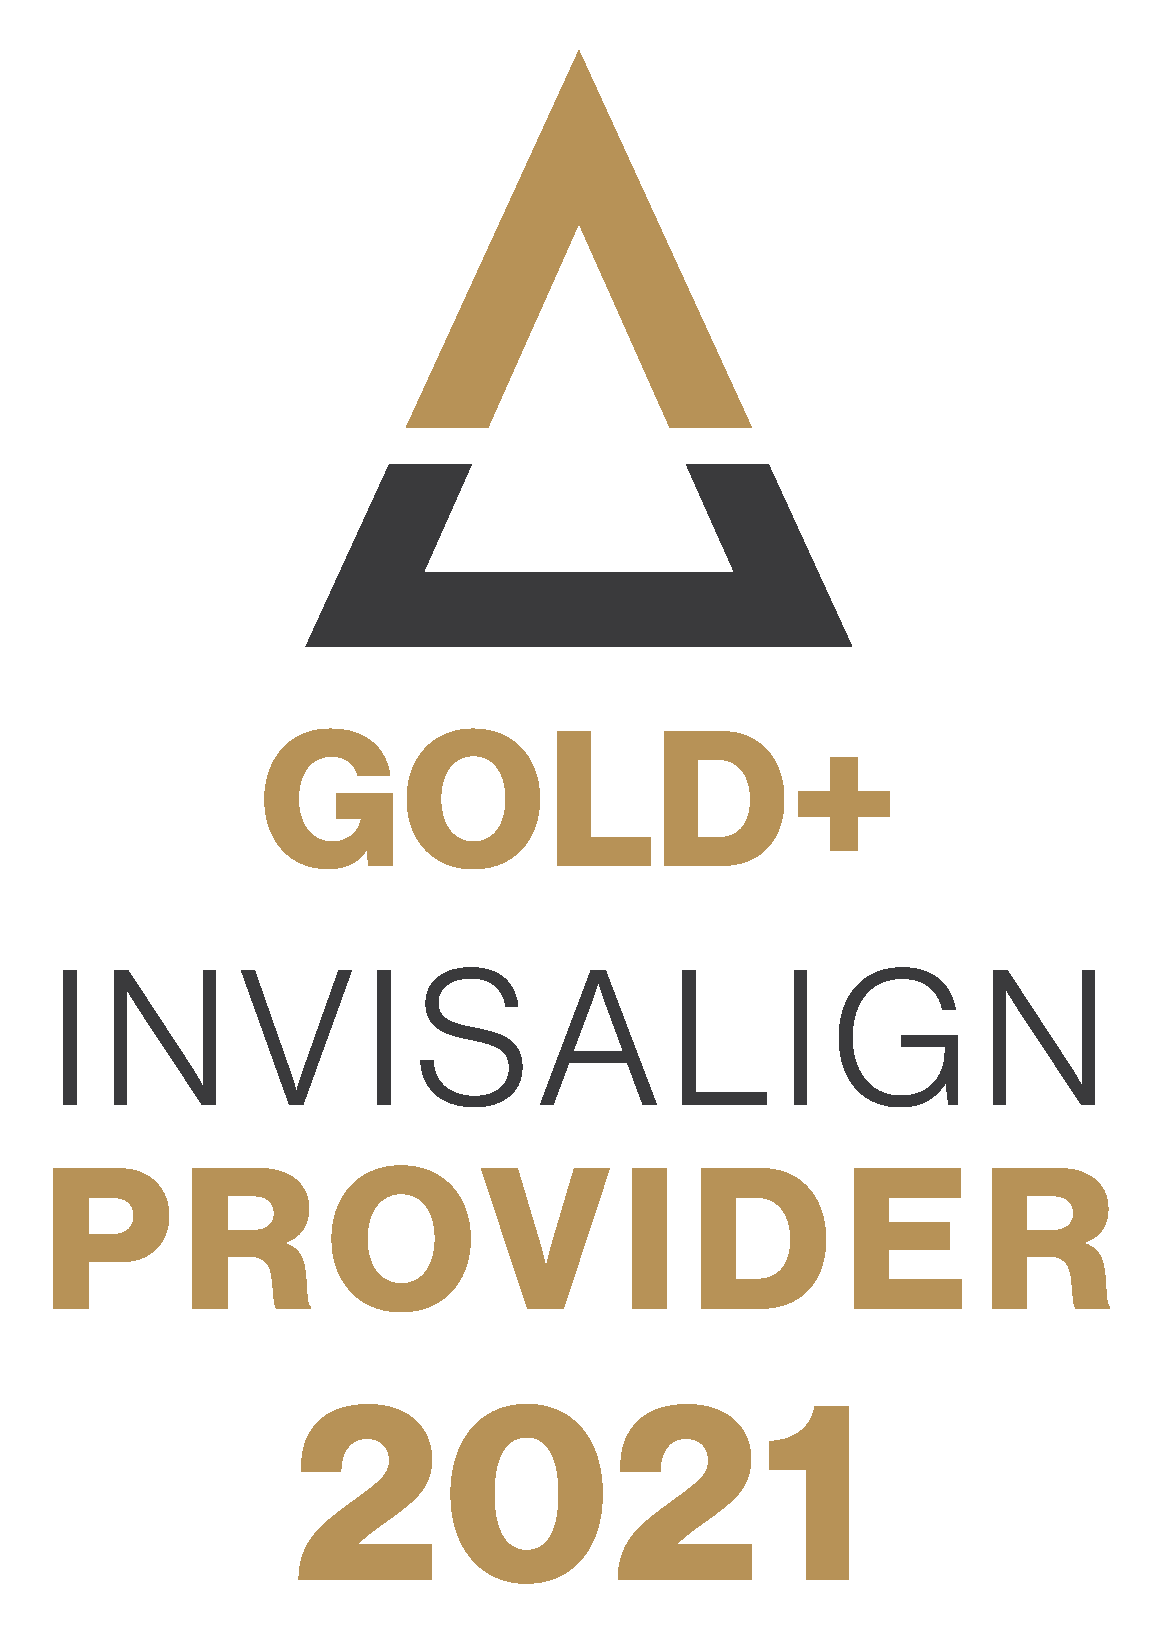 A gold invisalign provider badge with an arrow.